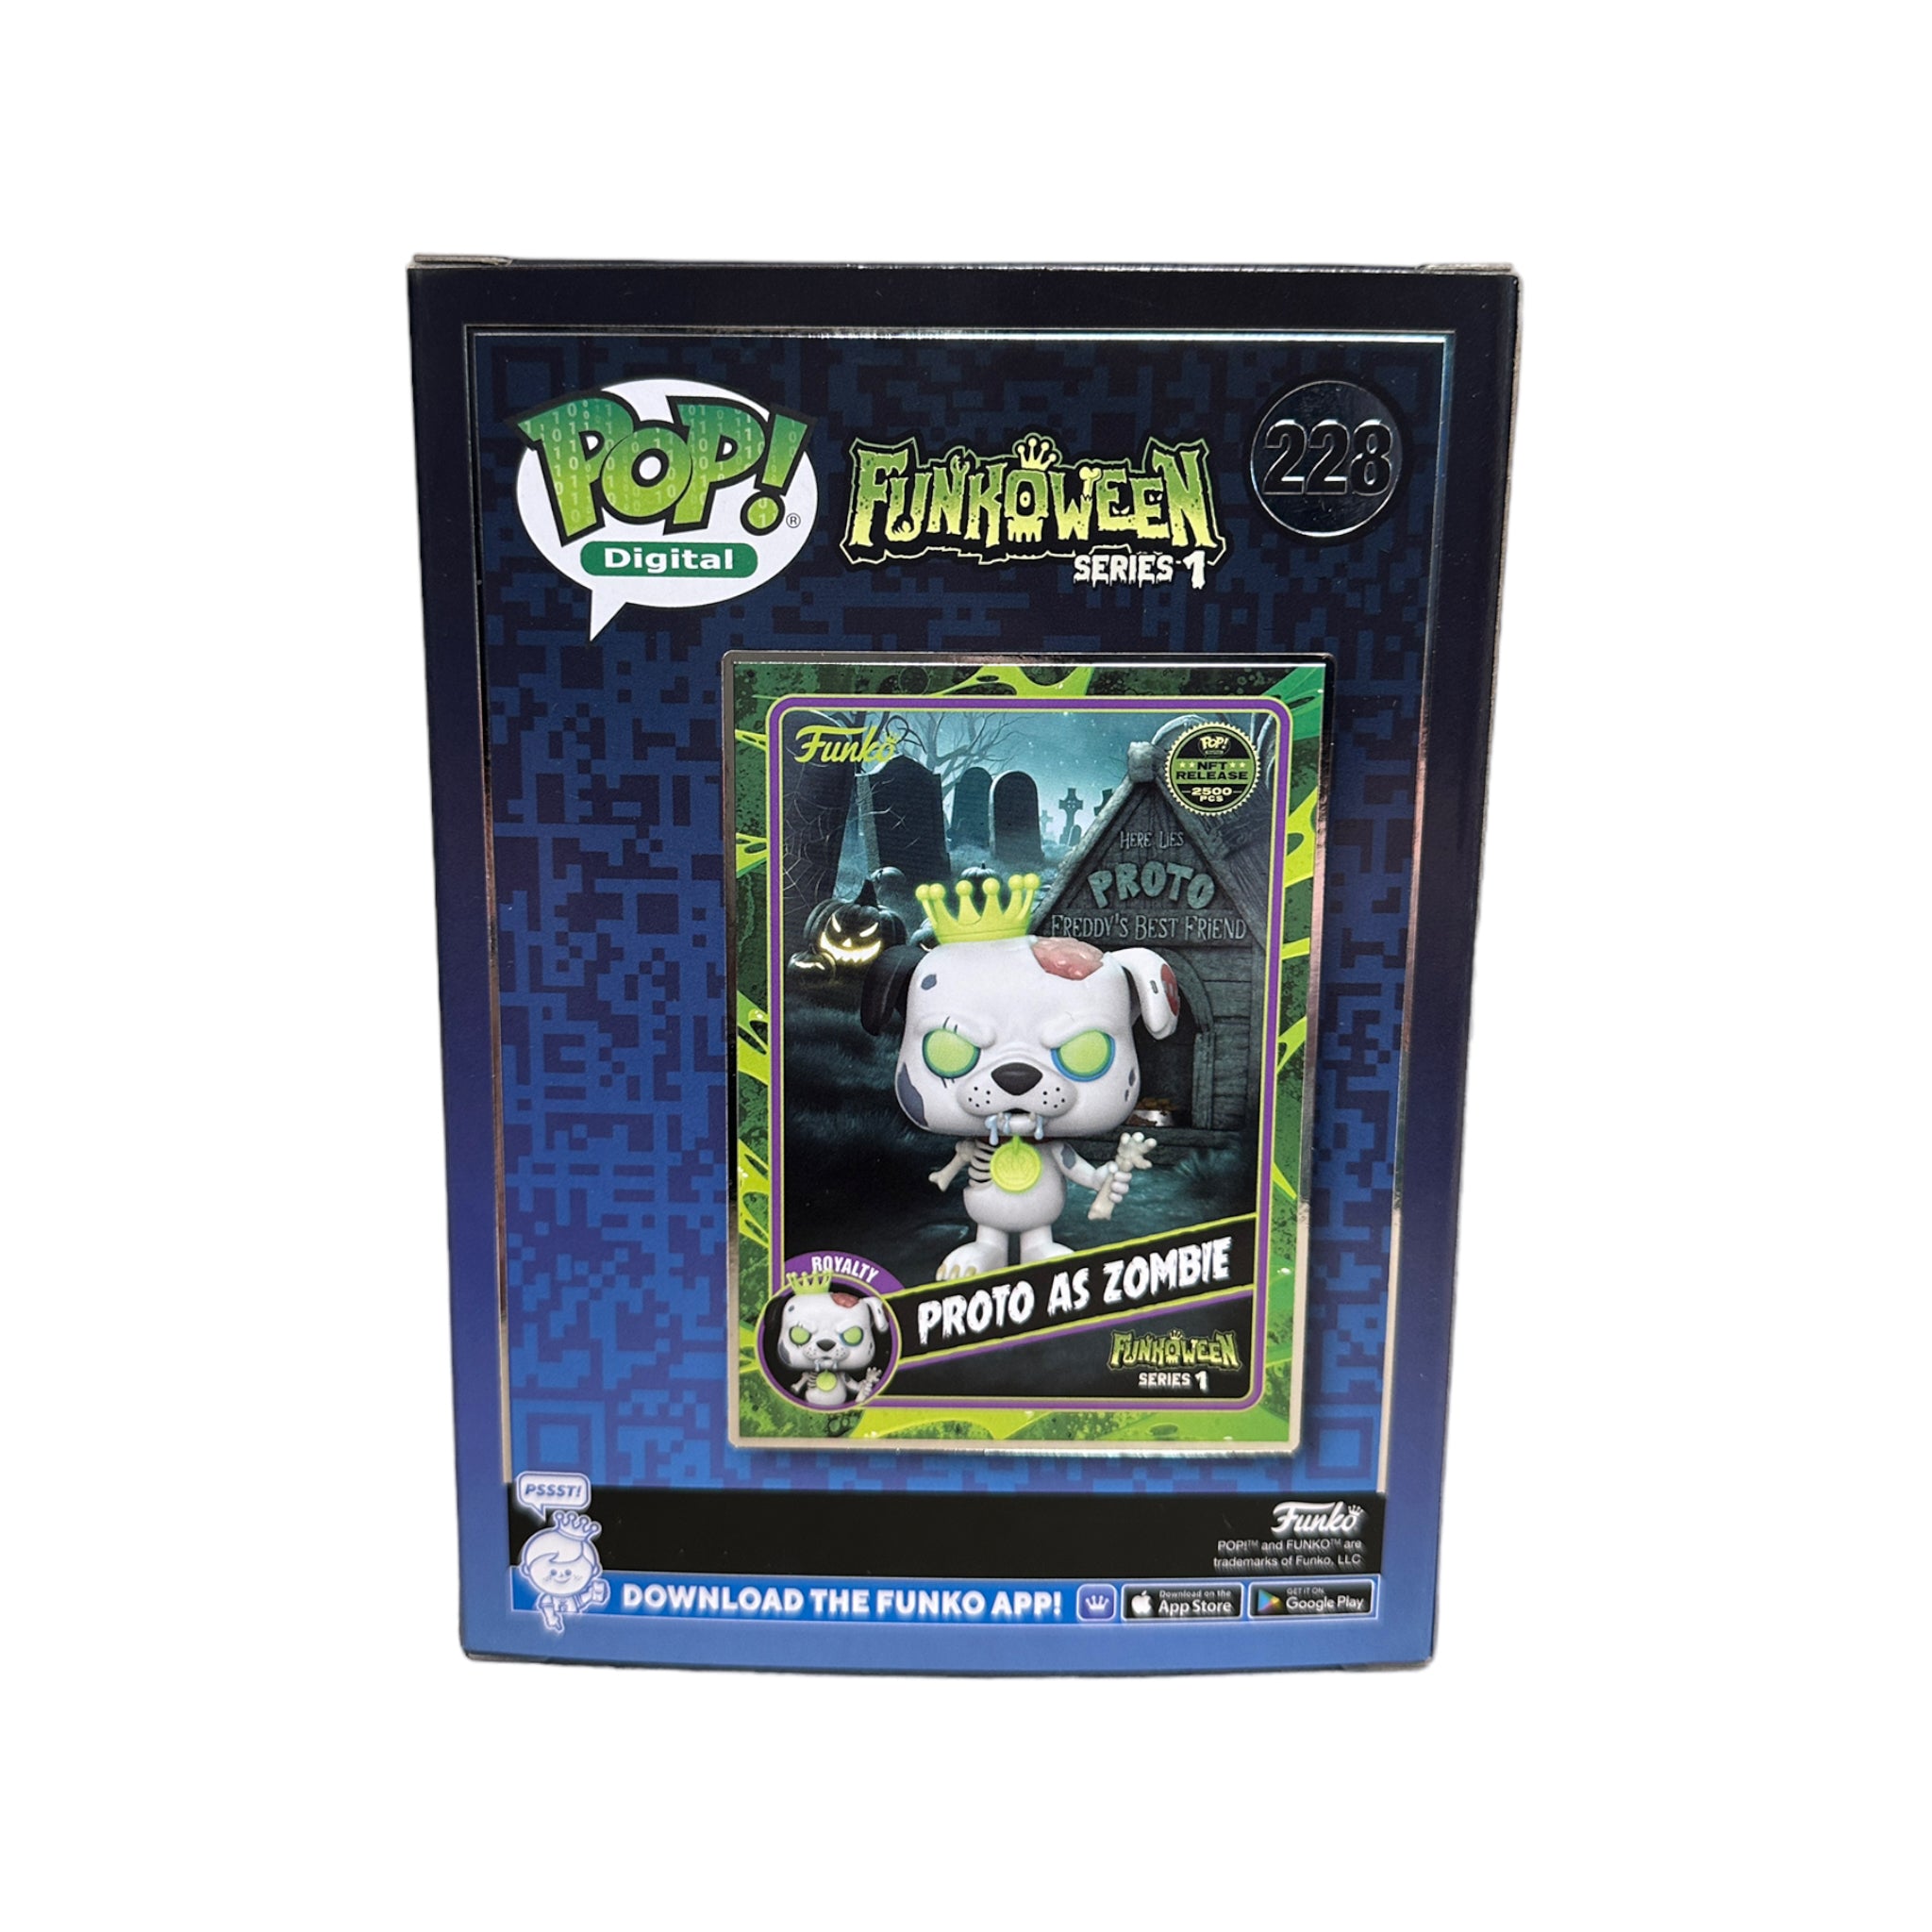 Proto as Zombie #228 (Glows in the Dark) Funko Pop! - Funkoween Series 1 - NFT Release Exclusive LE2500 Pcs - Condition 8.75/10